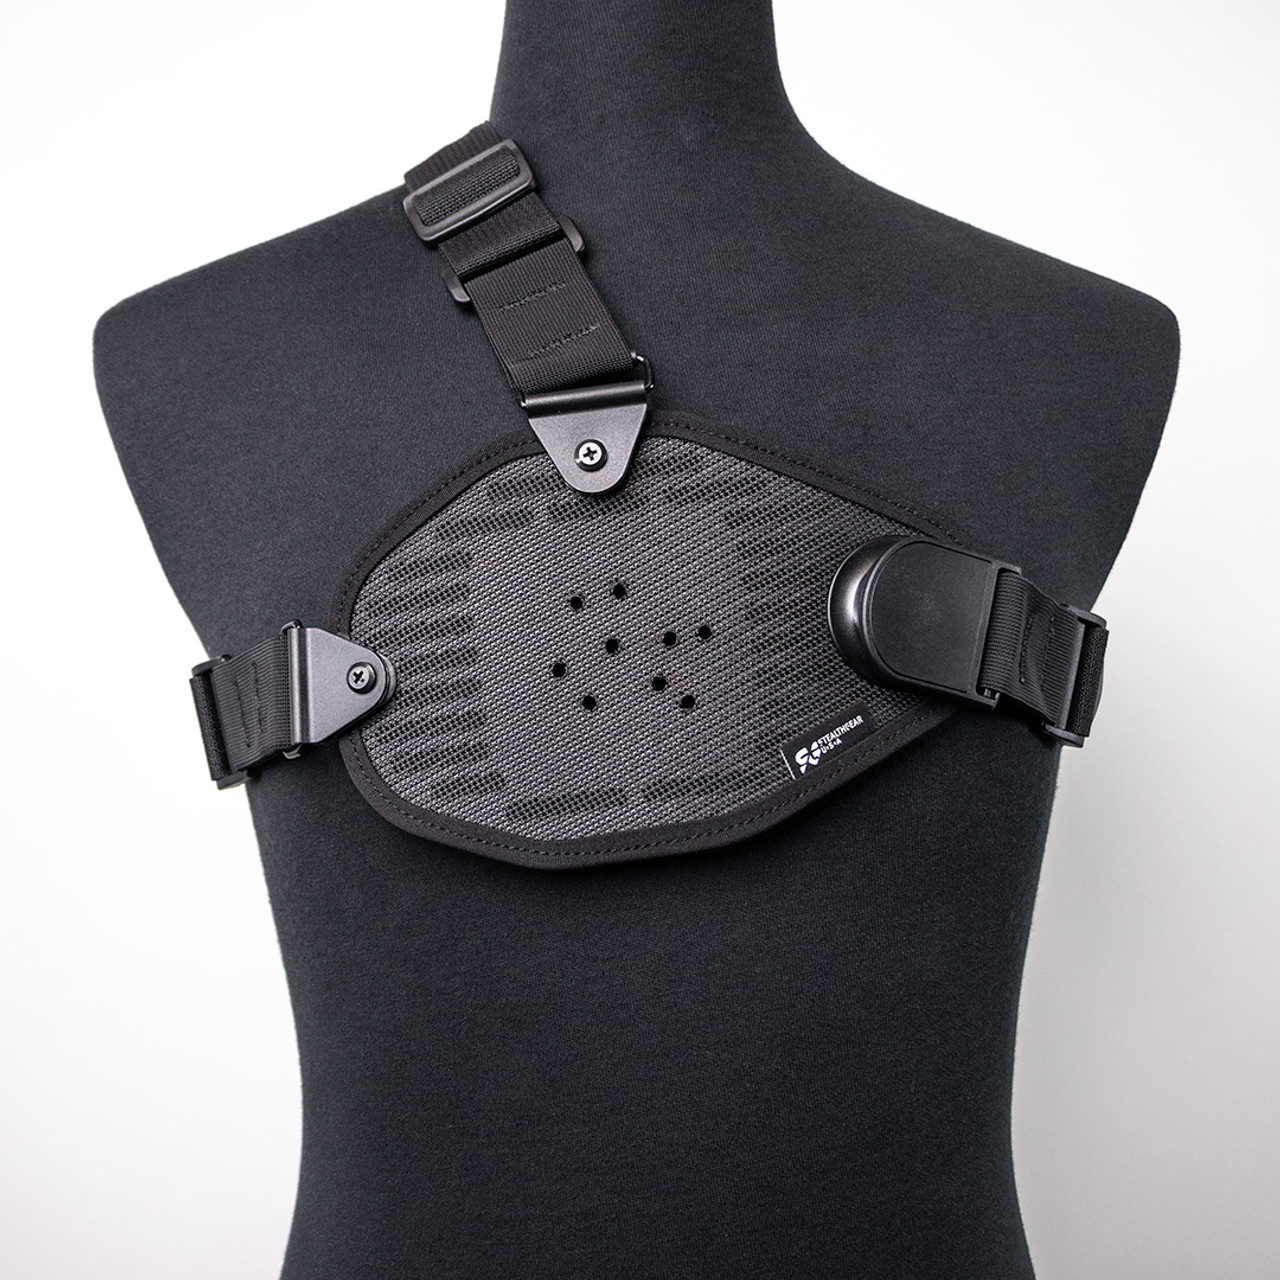 Chest Holster - Hunting Holster | StealthGearUSA Holsters